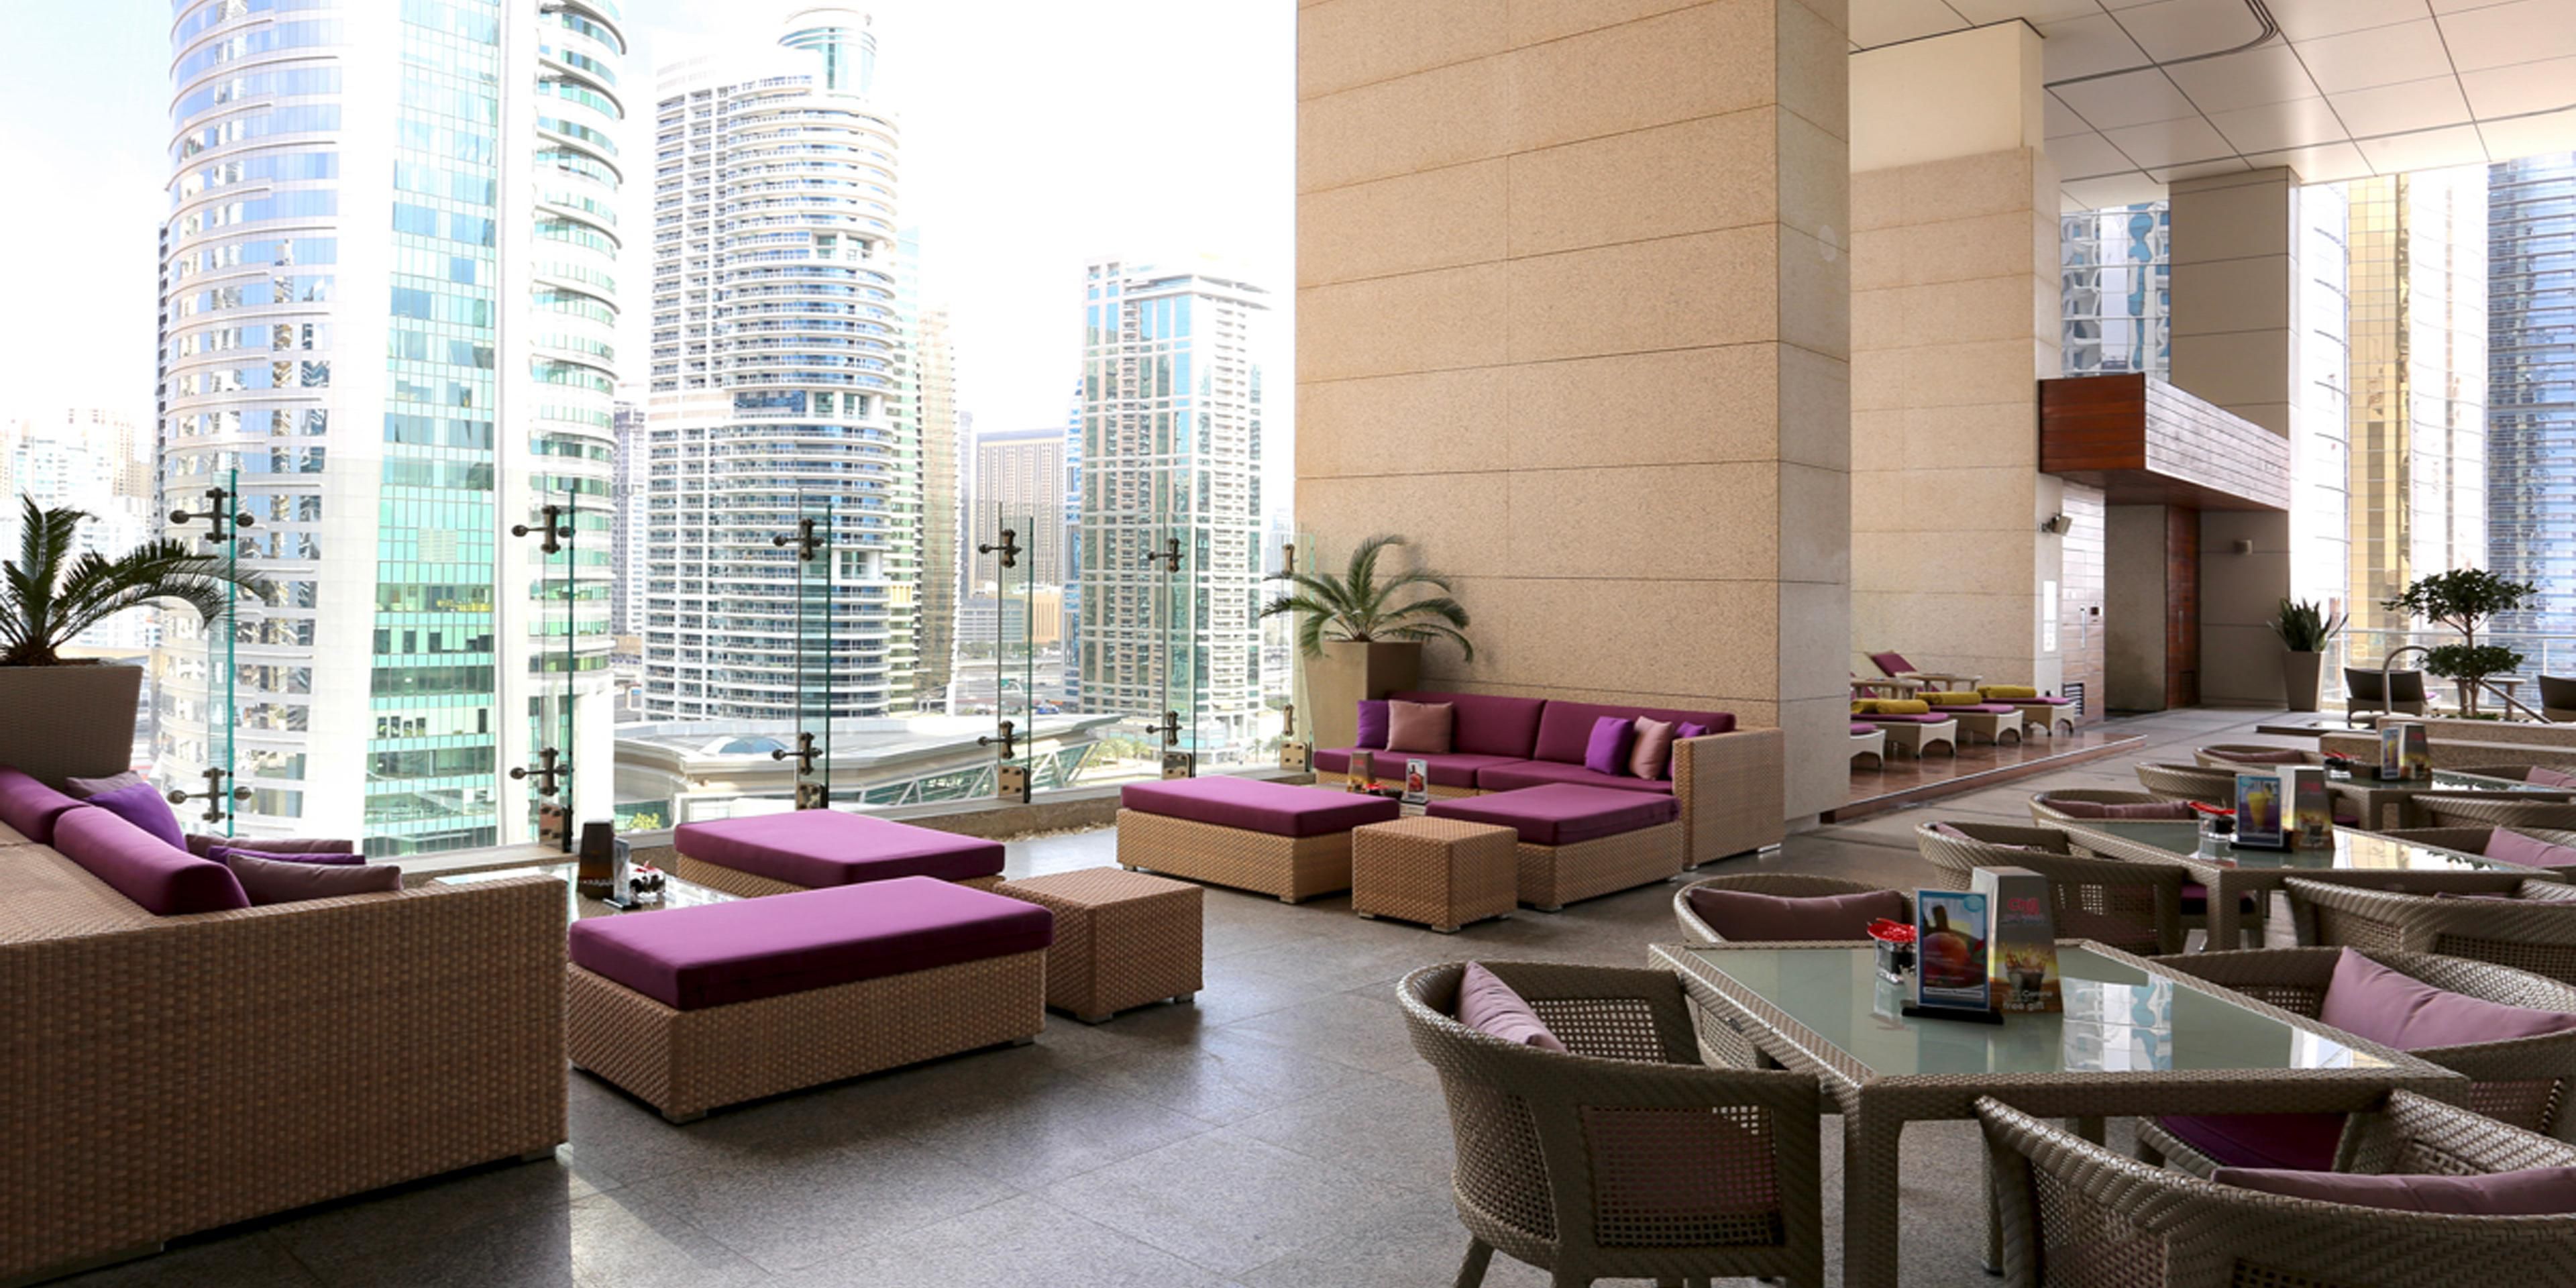 The urban poolside escape offers sweeping views of the Dubai Marina skyline. Take a dip in our infinity pool or sit back and relax in one of our beautifully comfortable sun loungers and enjoy some easy dining snacks and nibbles.